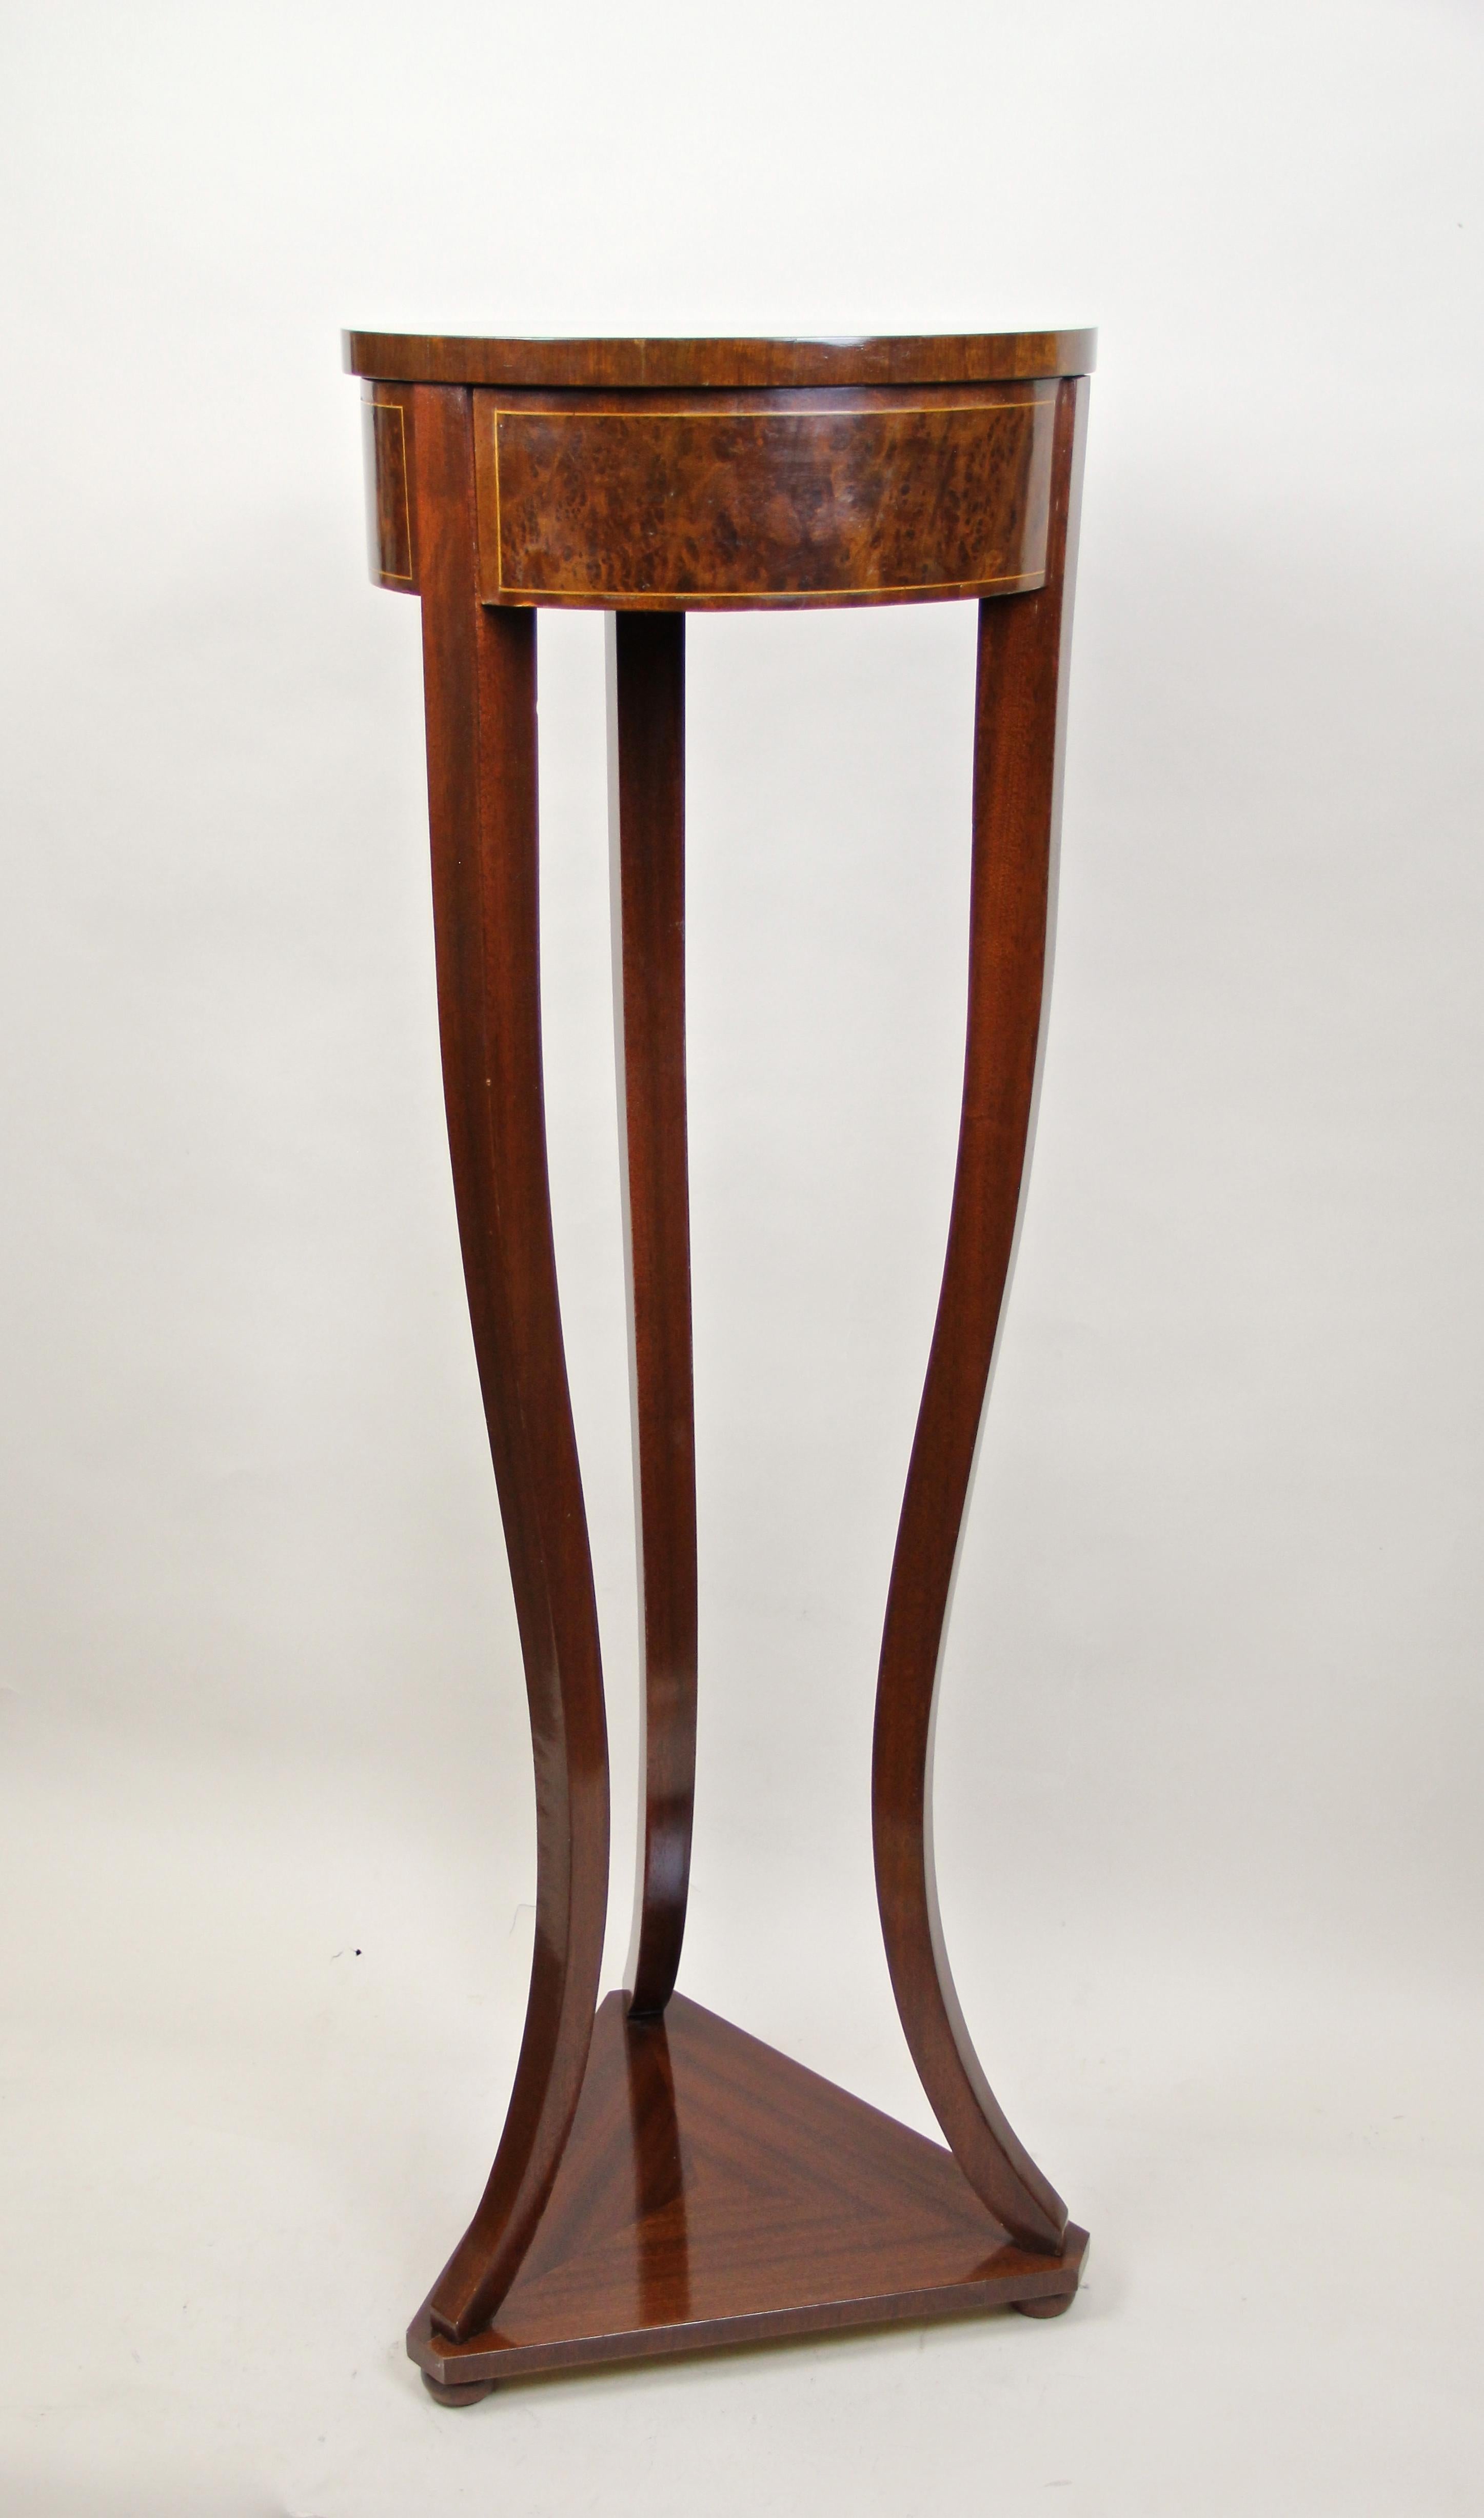 Exceptional Art Nouveau mahogany pedestal with inlayed bird's-eye maple, made in Austria, circa 1915. This timeless pedestal represents the classical form language of the famous Art Nouveau period best. Standing on a great looking triangle base